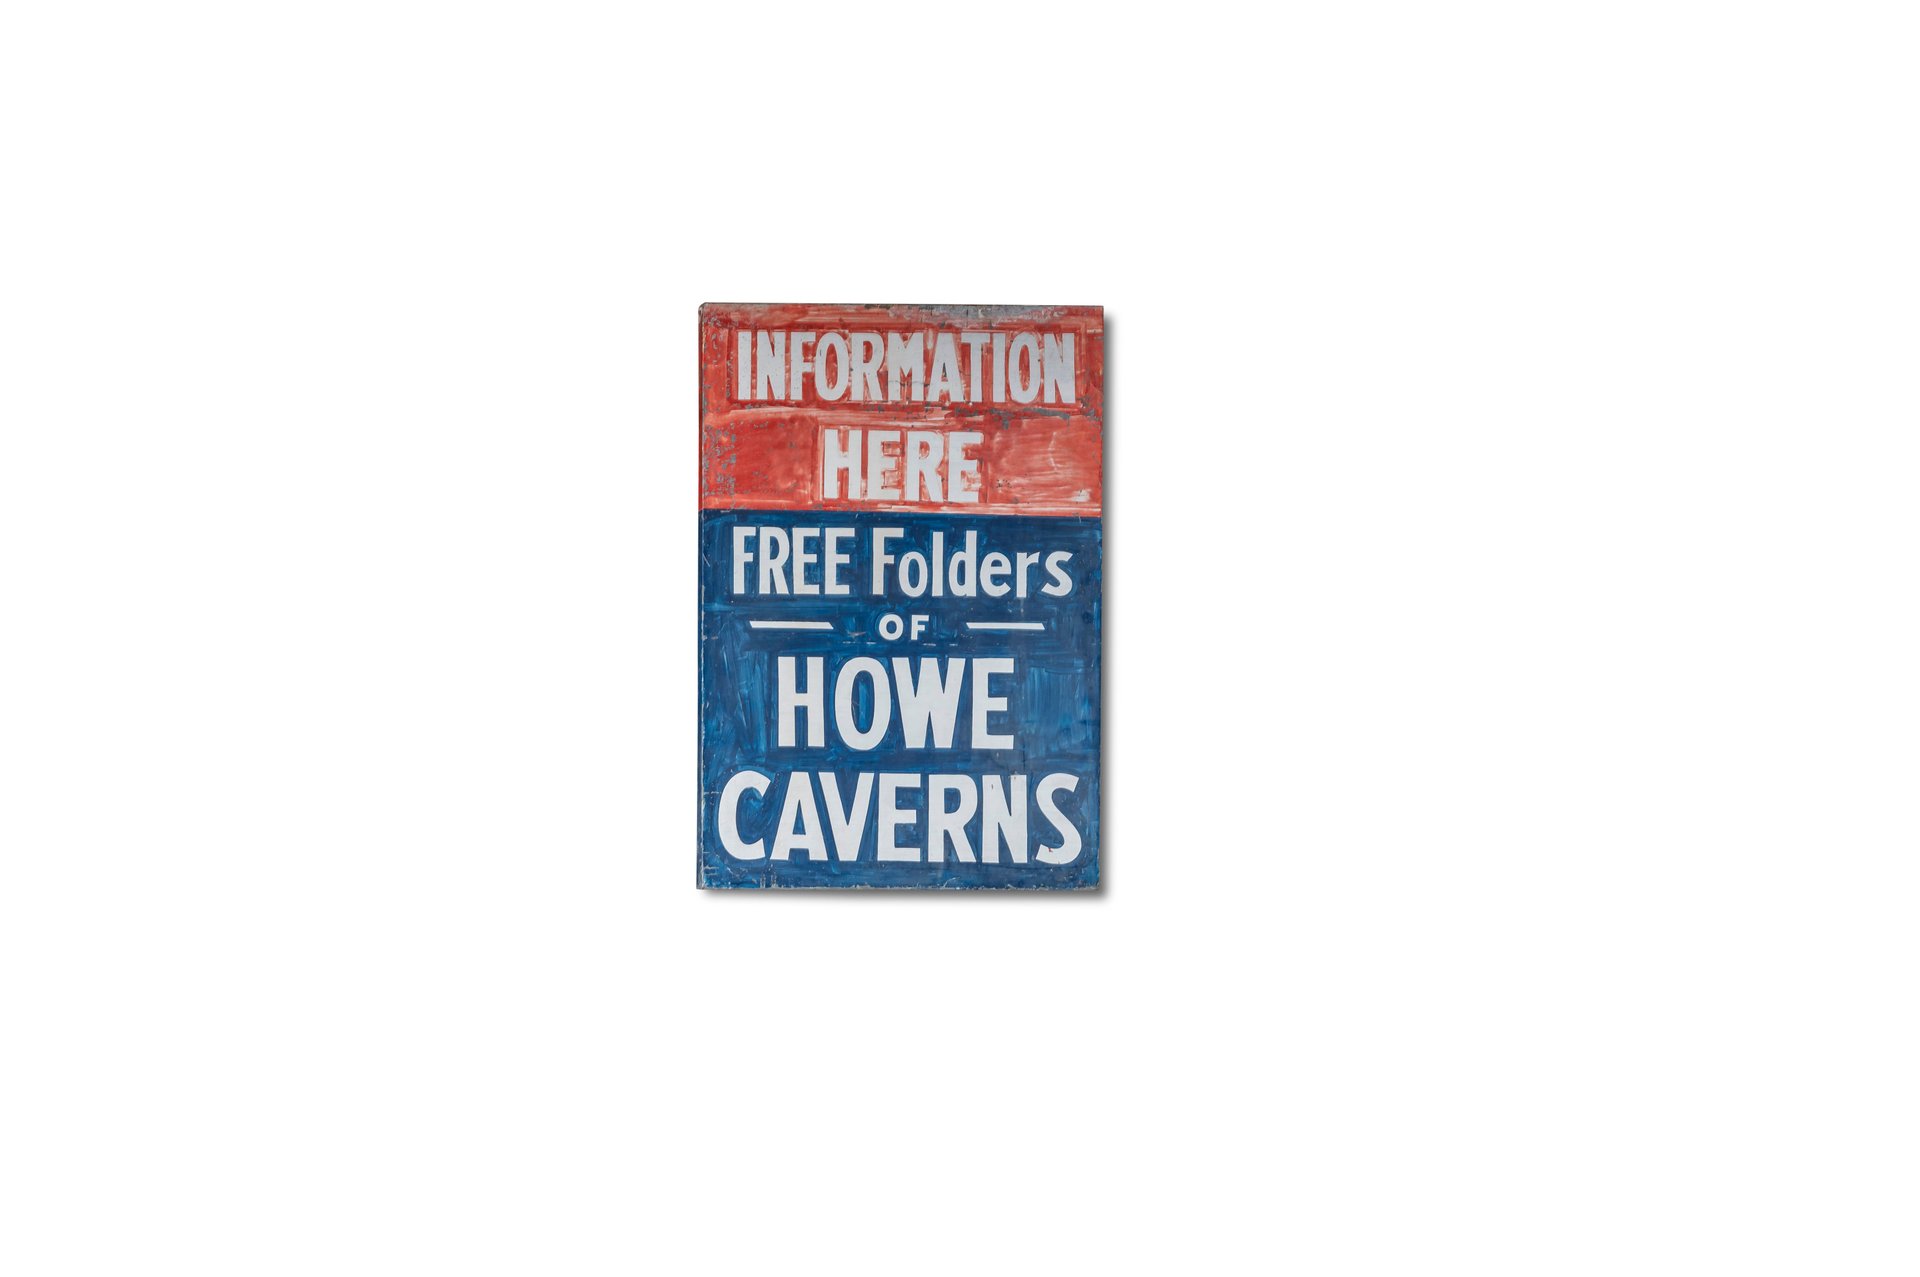 For Sale 'Howe Caverns' Metal Sign, Double-Sided